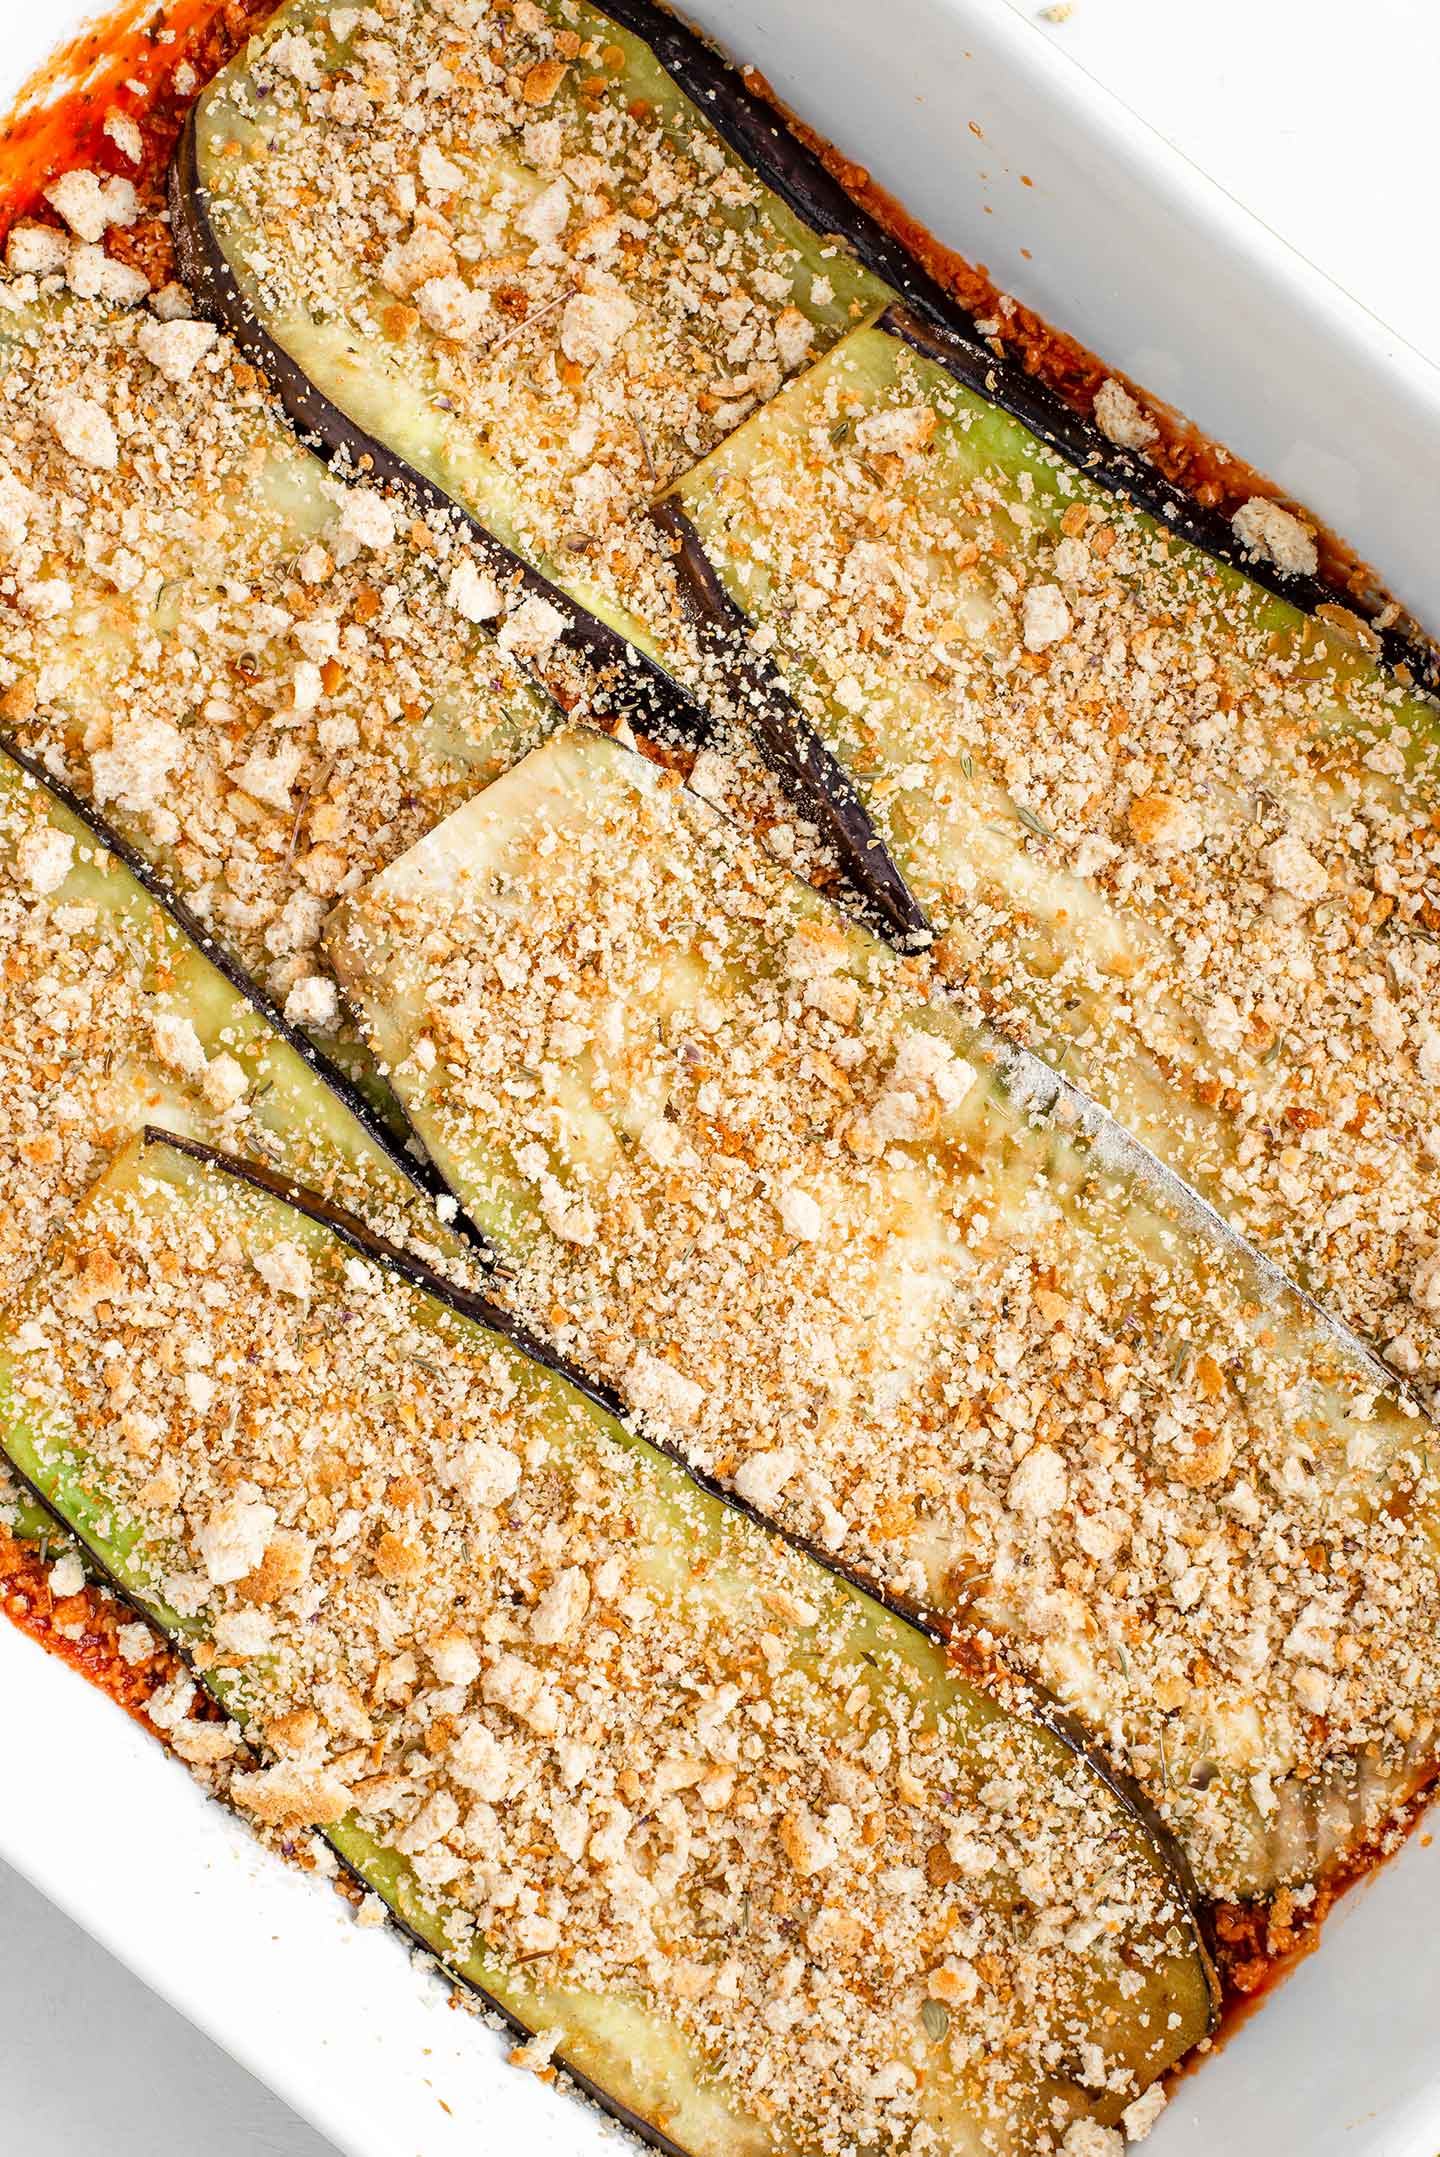 Top down view of sliced eggplant sprinkled with breadcrumbs in a casserole dish. The eggplant sits atop a thin layer of tomato sauce.